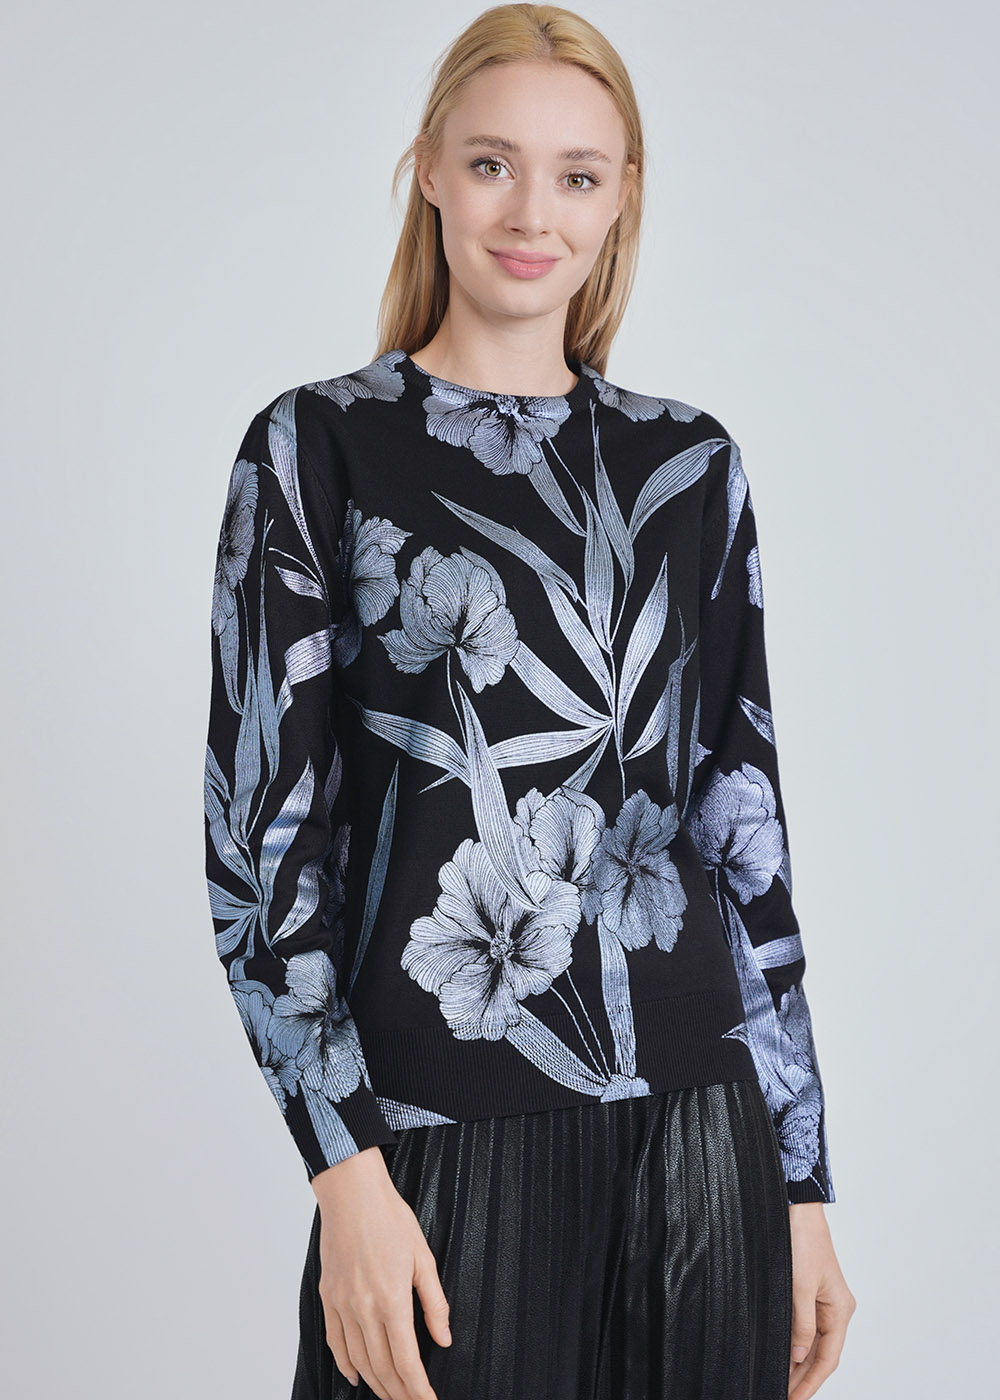 Nature's Whisper: Black Knit with Blue Floral & Foliage Patterns